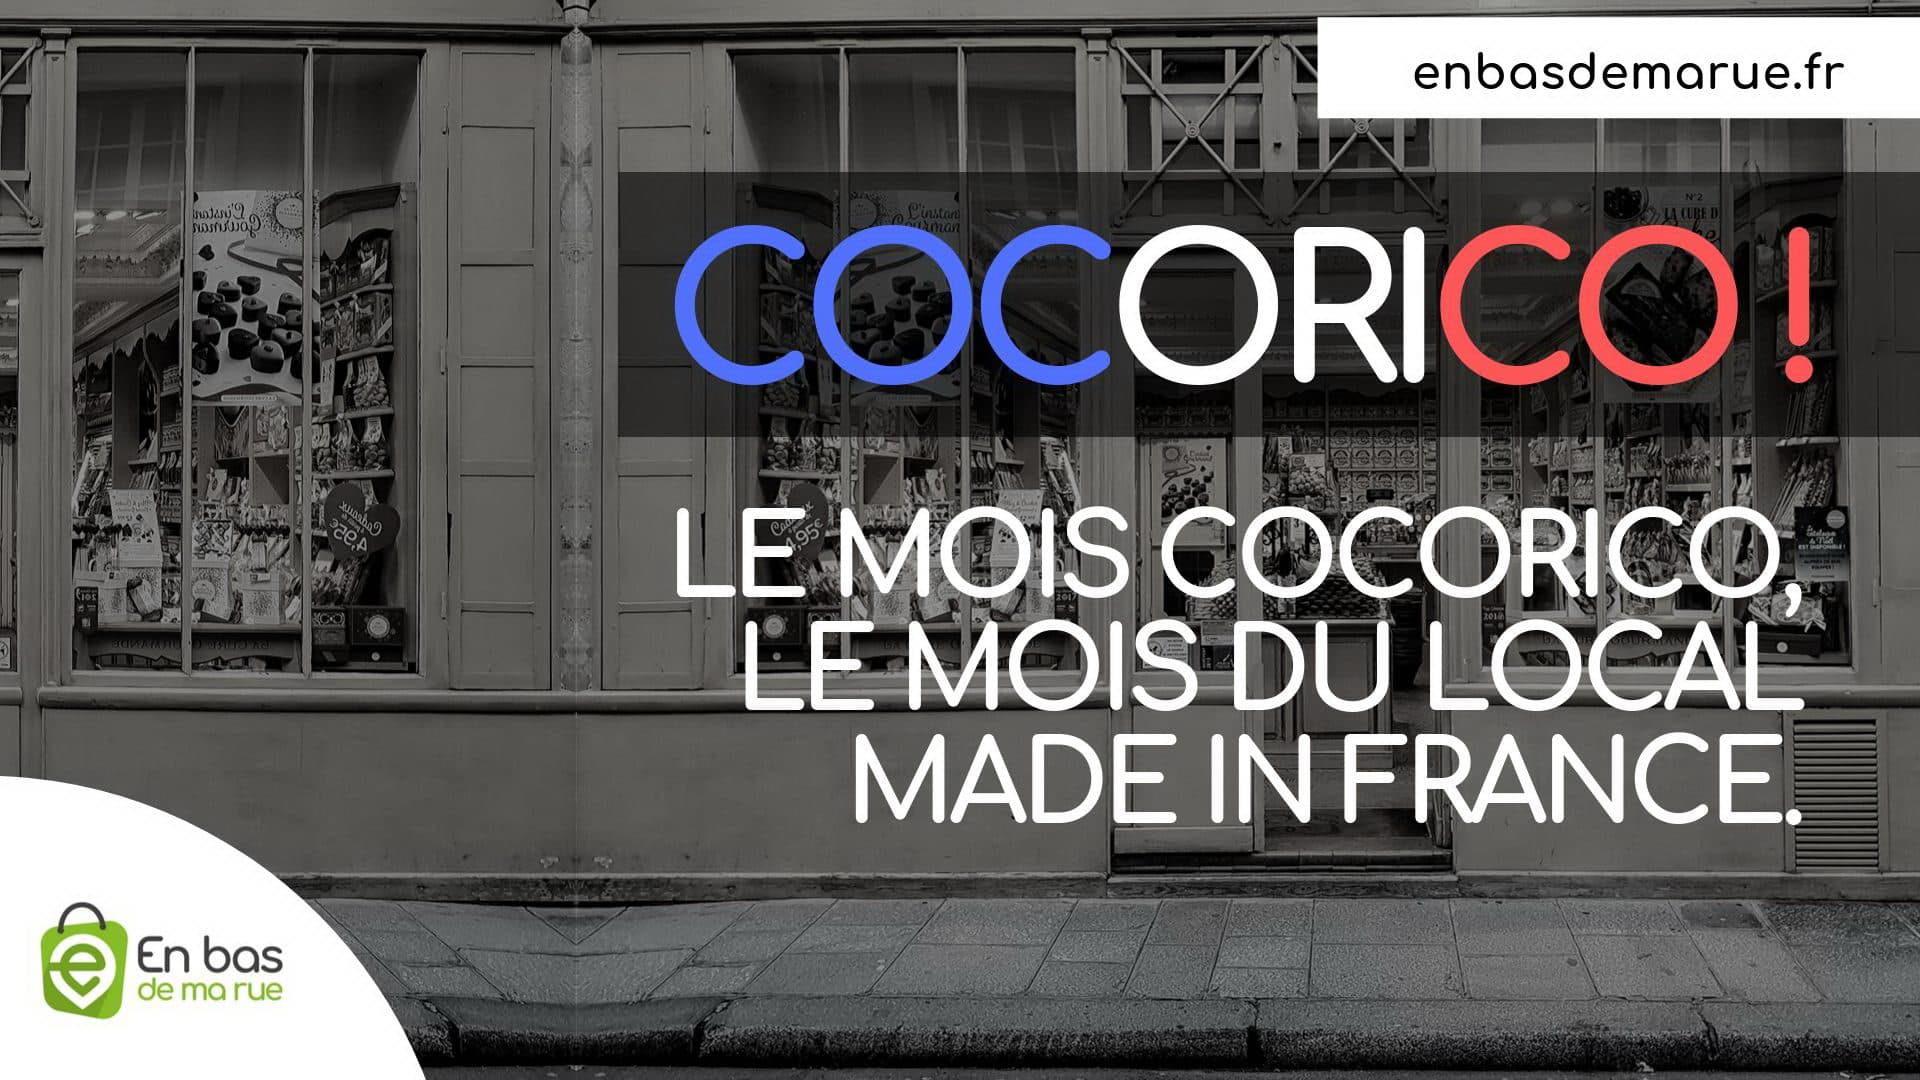 You are currently viewing Cocorico ! Quand Enbasdemarue combine achat local et achat digital